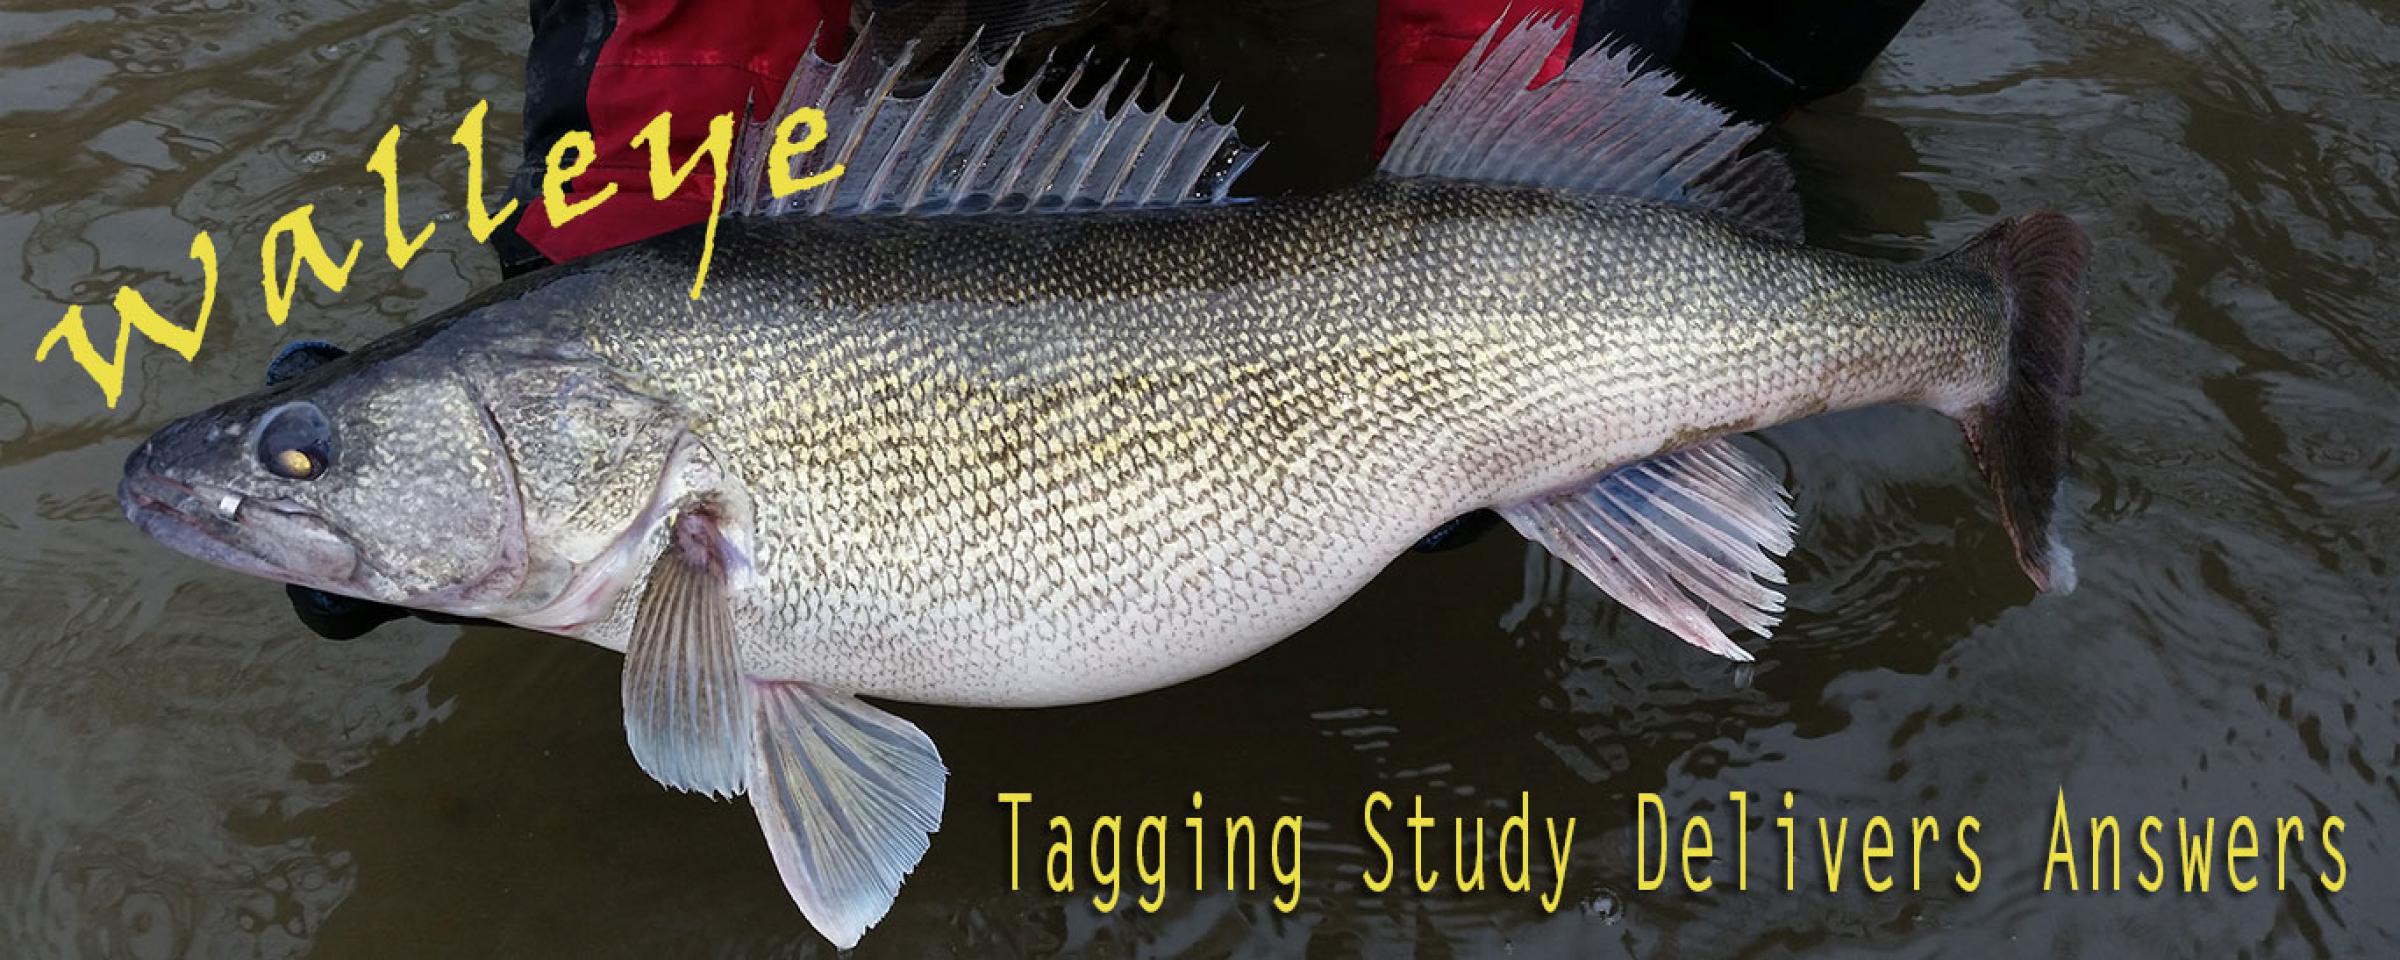 Walleye Tagging Study Delivers Answers